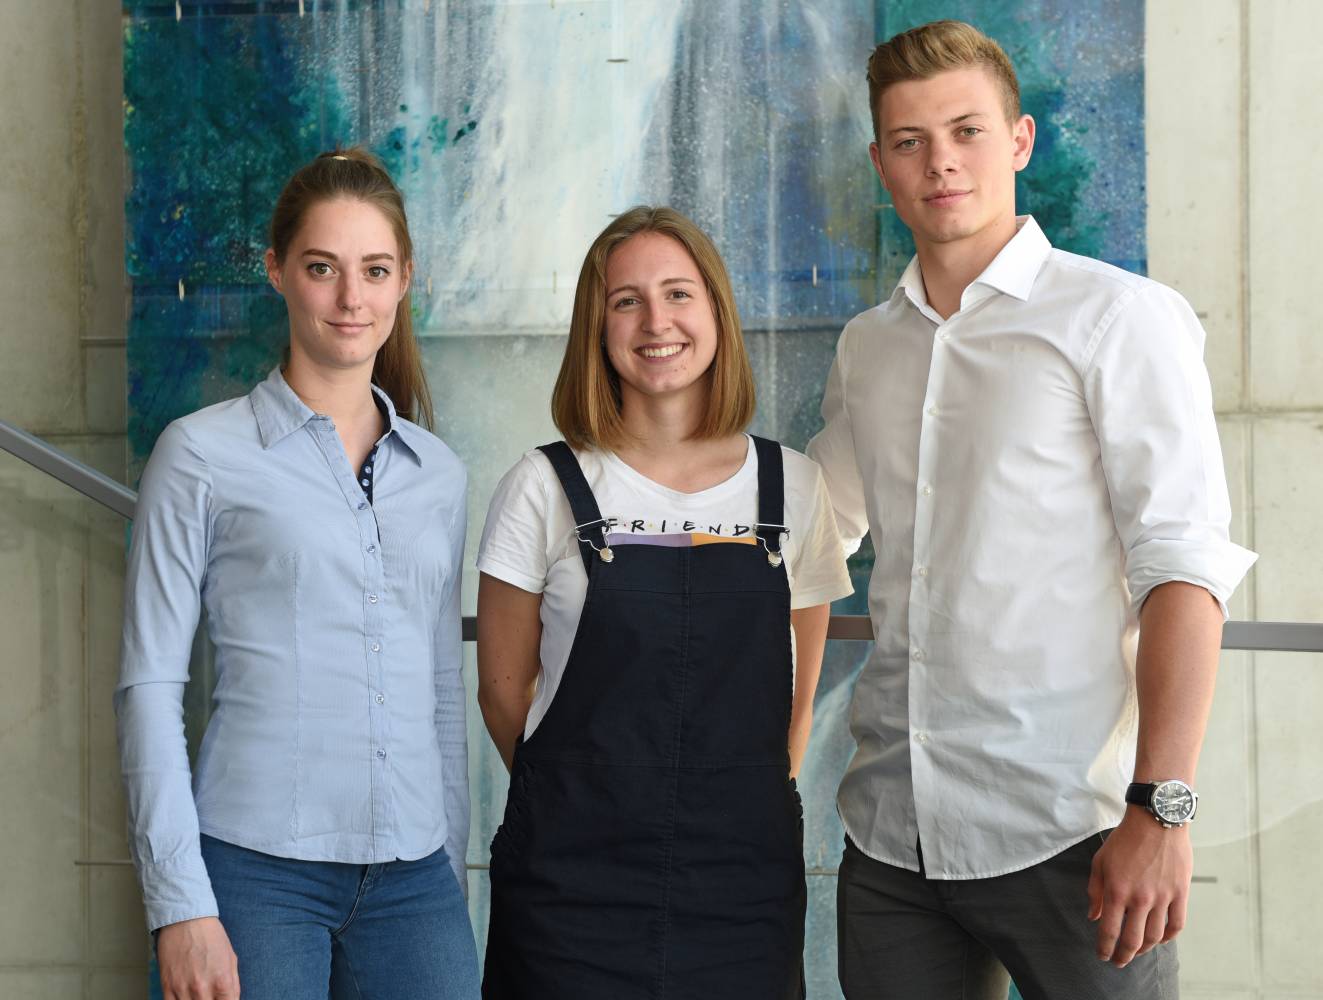 The new chairpersons, from left: Katharina Elena Walser, Caroline Bachlechner, Stefan Soier. Photo: MCI